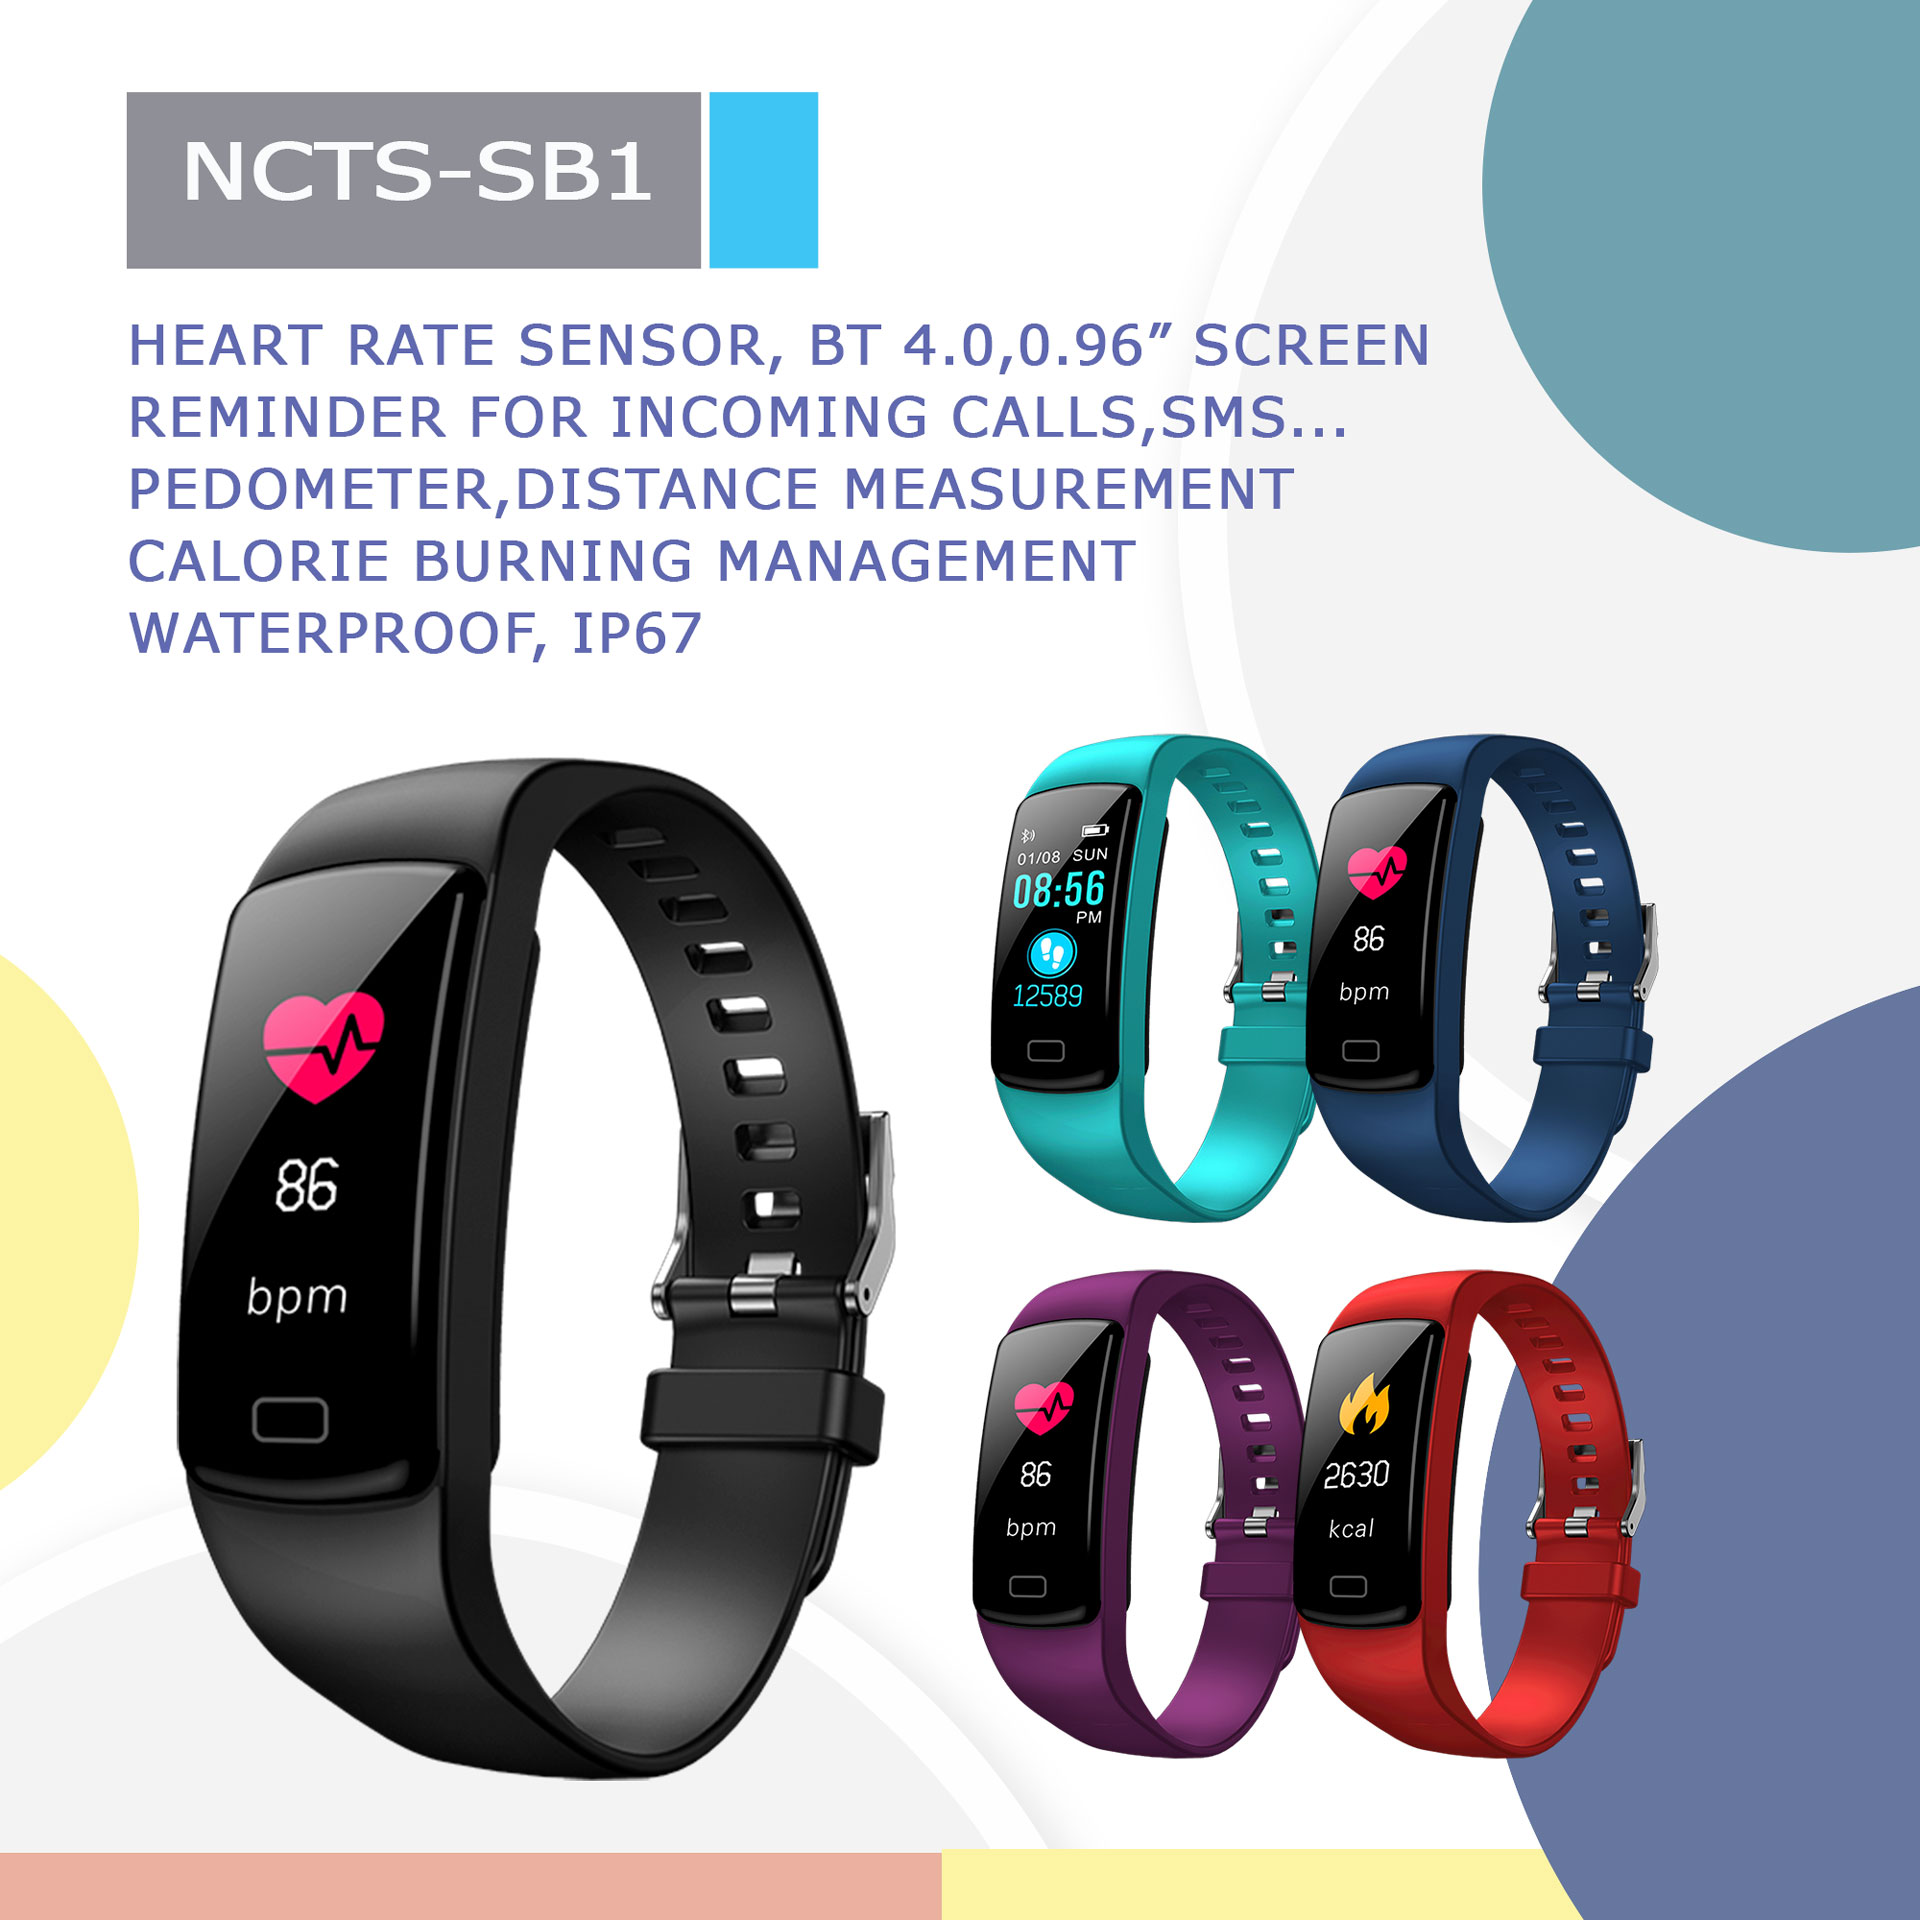 SIFIT-7.8 Smart Heart Rate Monitor Pedometer With Bluetooth - SIFSOF